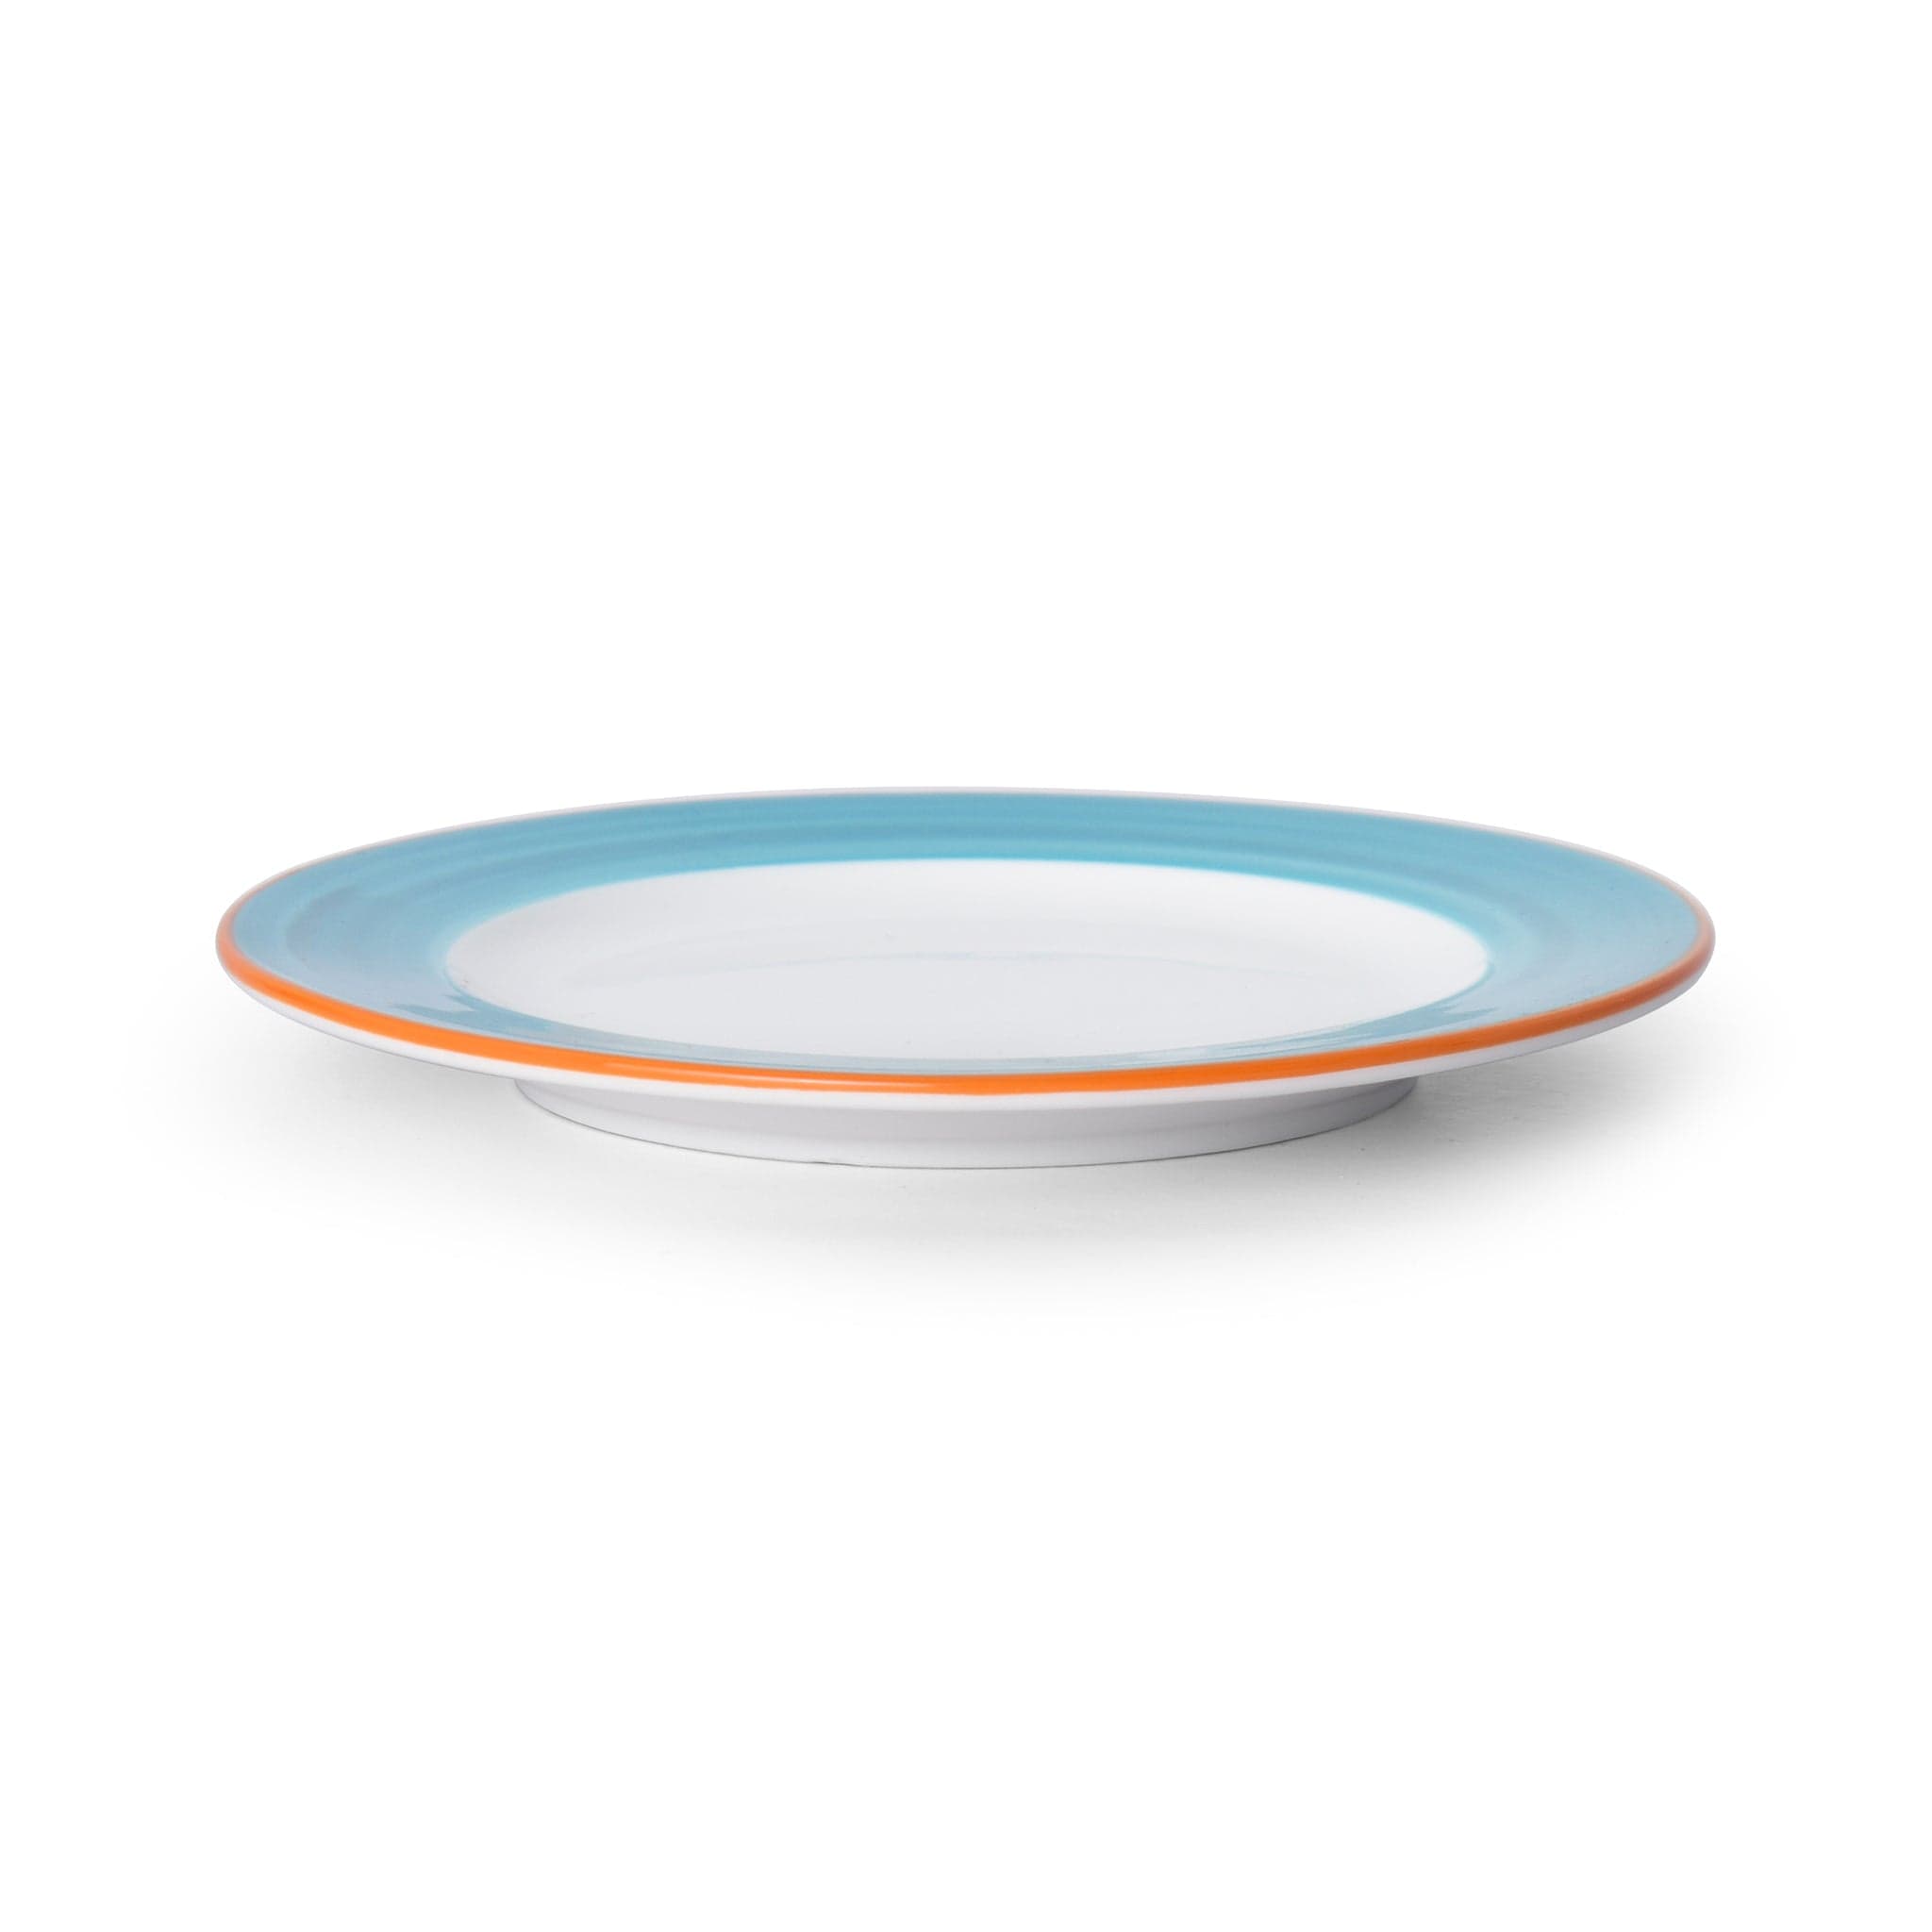 Bistro Sunday Brunch Porcelain Plate 7" Turquoise #color_turquoise